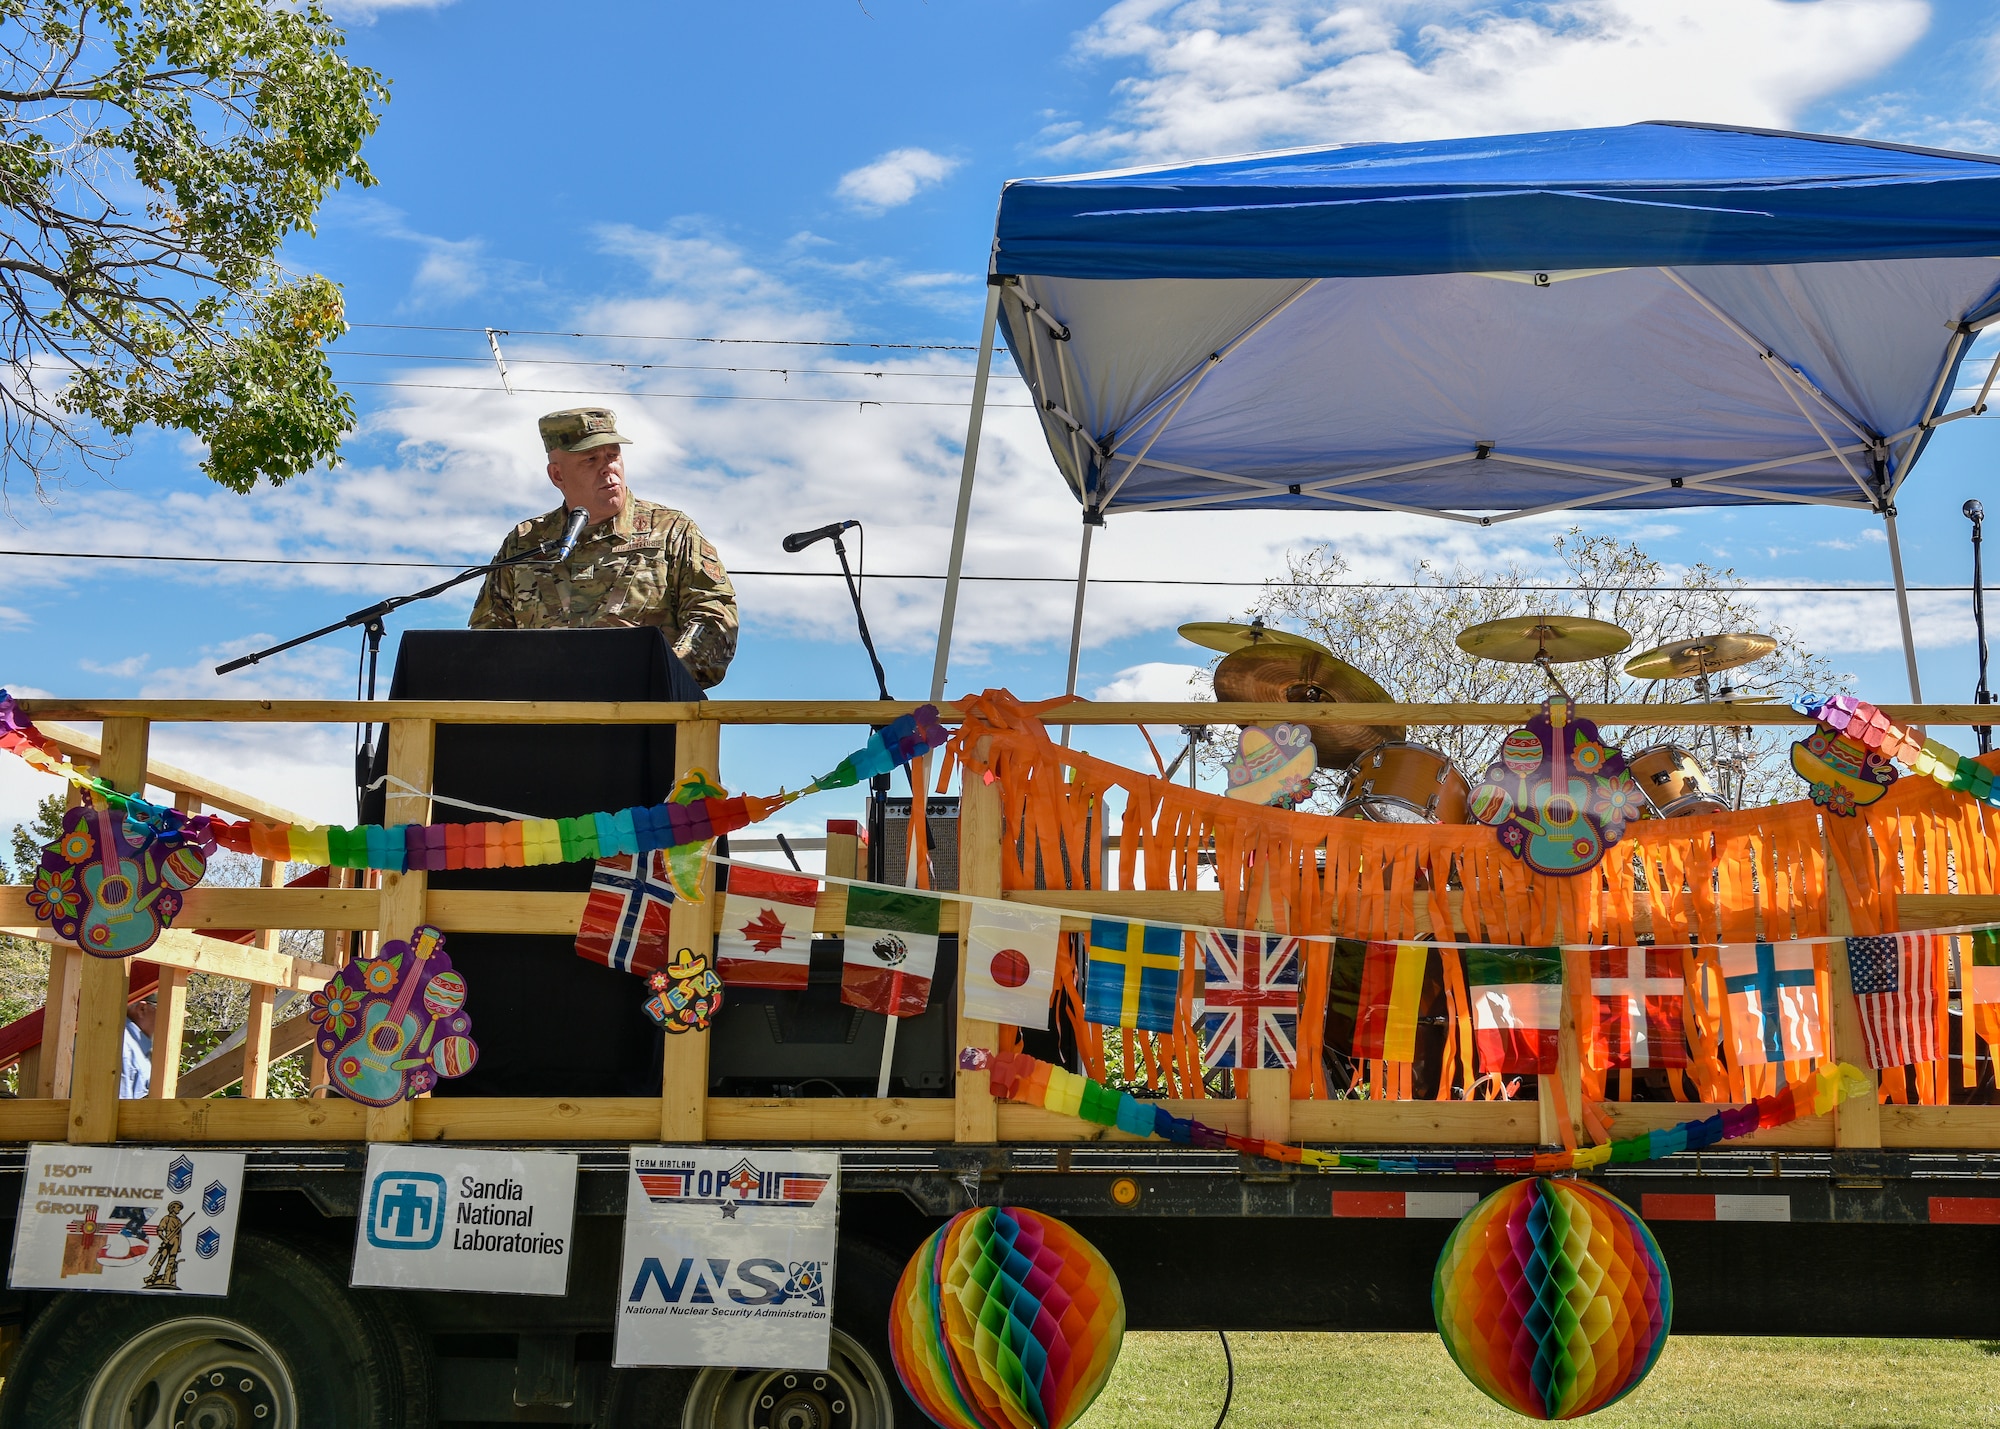 U.S. Air Force Col. Christopher King, 377th Air Base Wing vice commander, talks about the unique opportunities service members have to be stationed in Albuquerque at Kirtland Air Force Base, N.M., Oct. 3, 2019. People belonging to the various units on base and mission partners of Kirtland AFB attended the festivities. (U.S. Air Force photo by Airman 1st Class Austin J. Prisbrey)